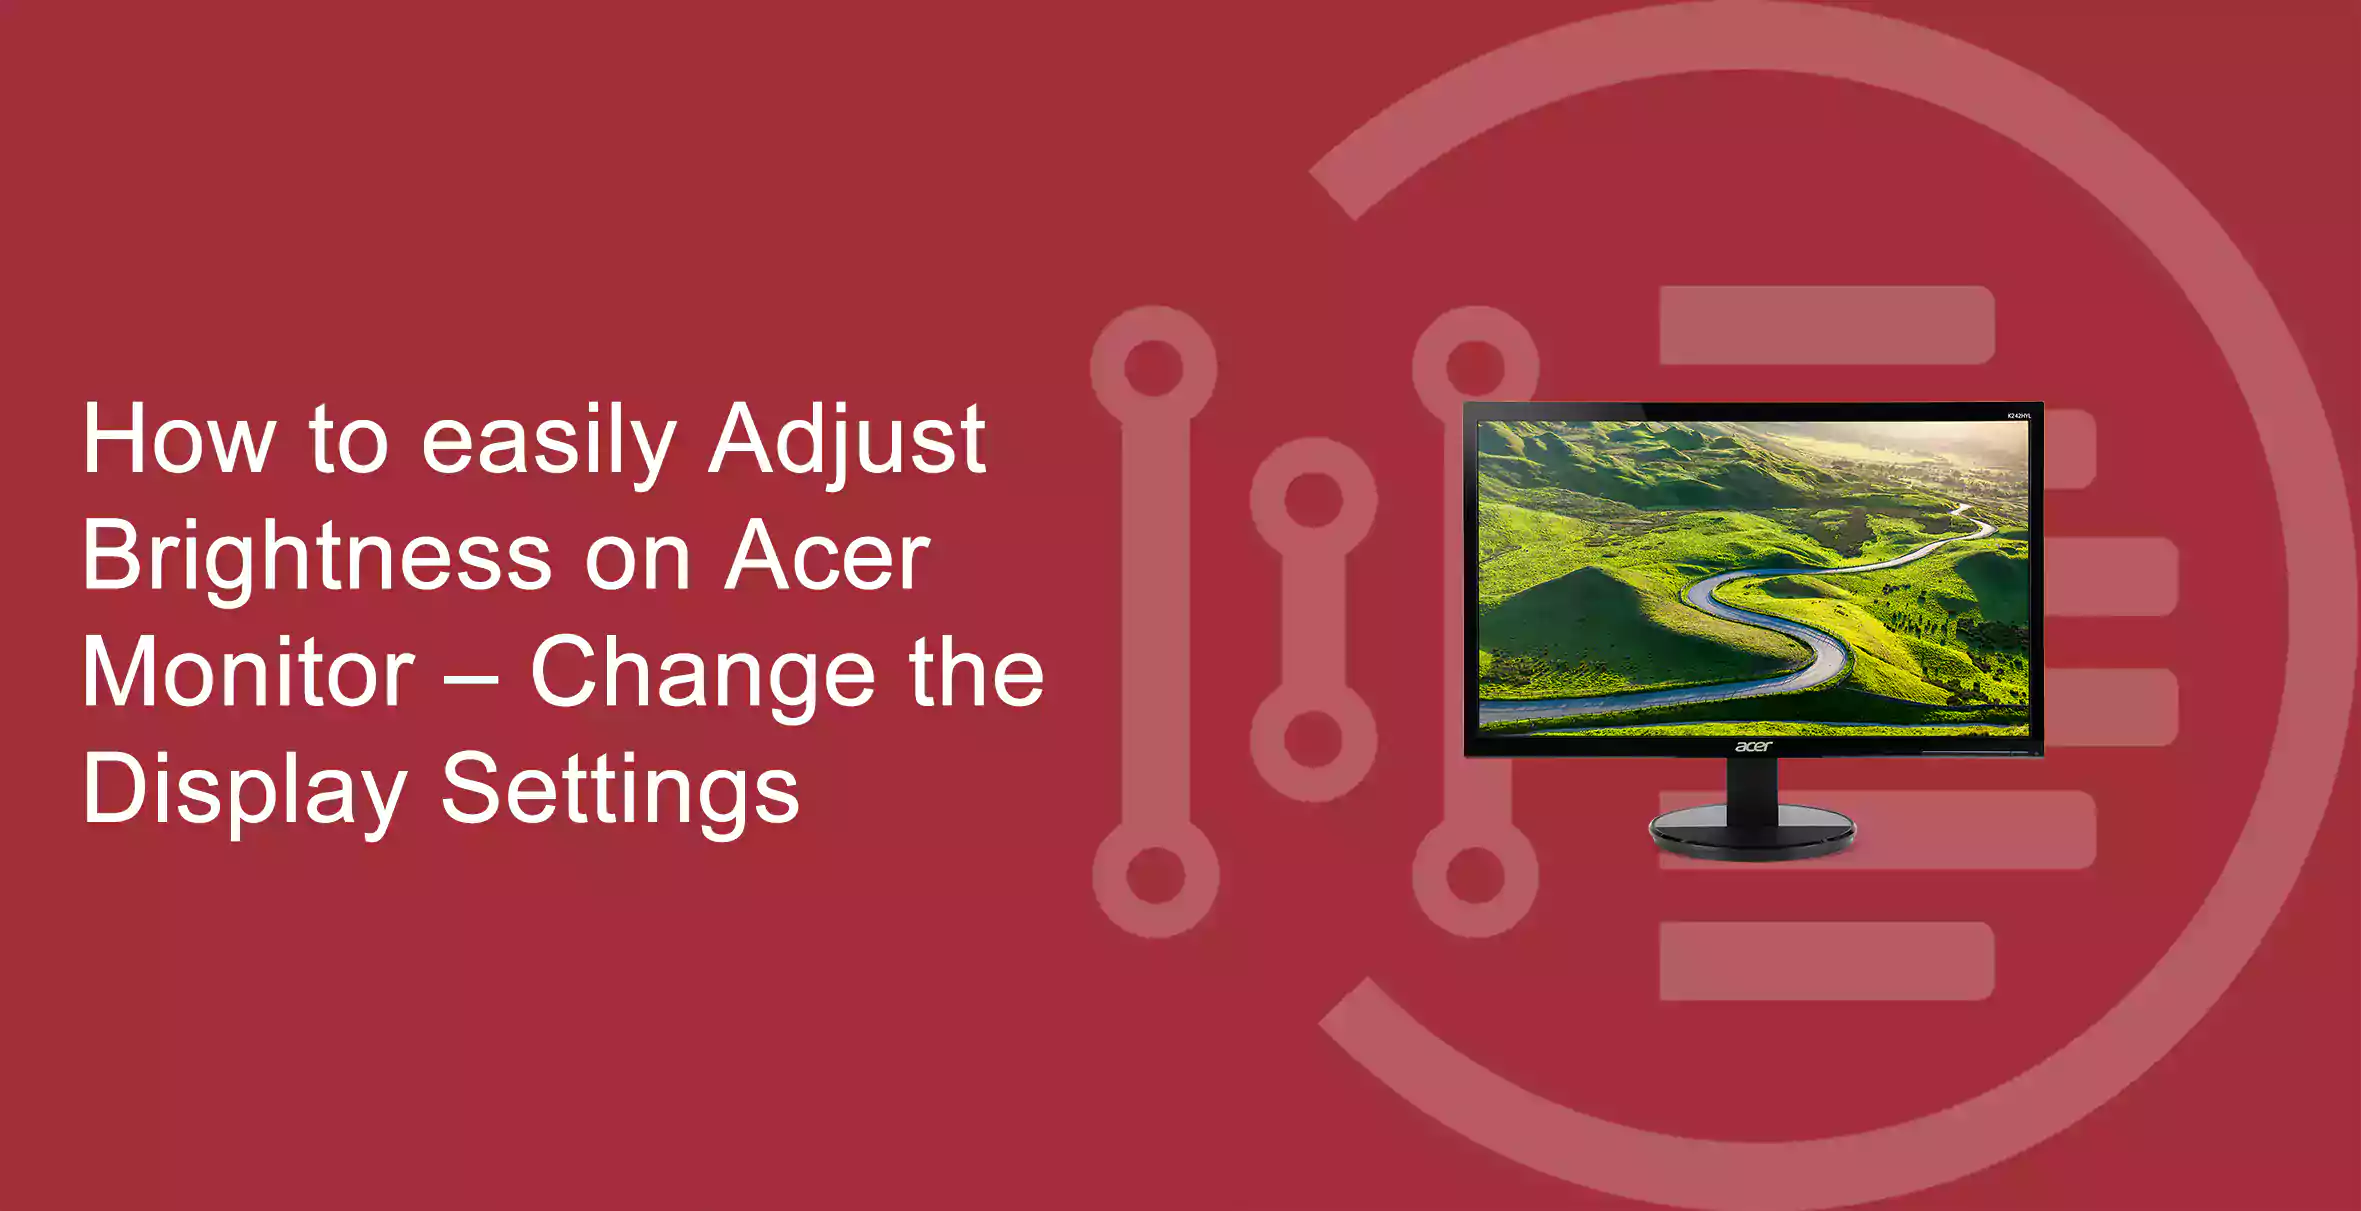 How to easily Adjust Brightness on Acer Monitor – Change the Display Settings